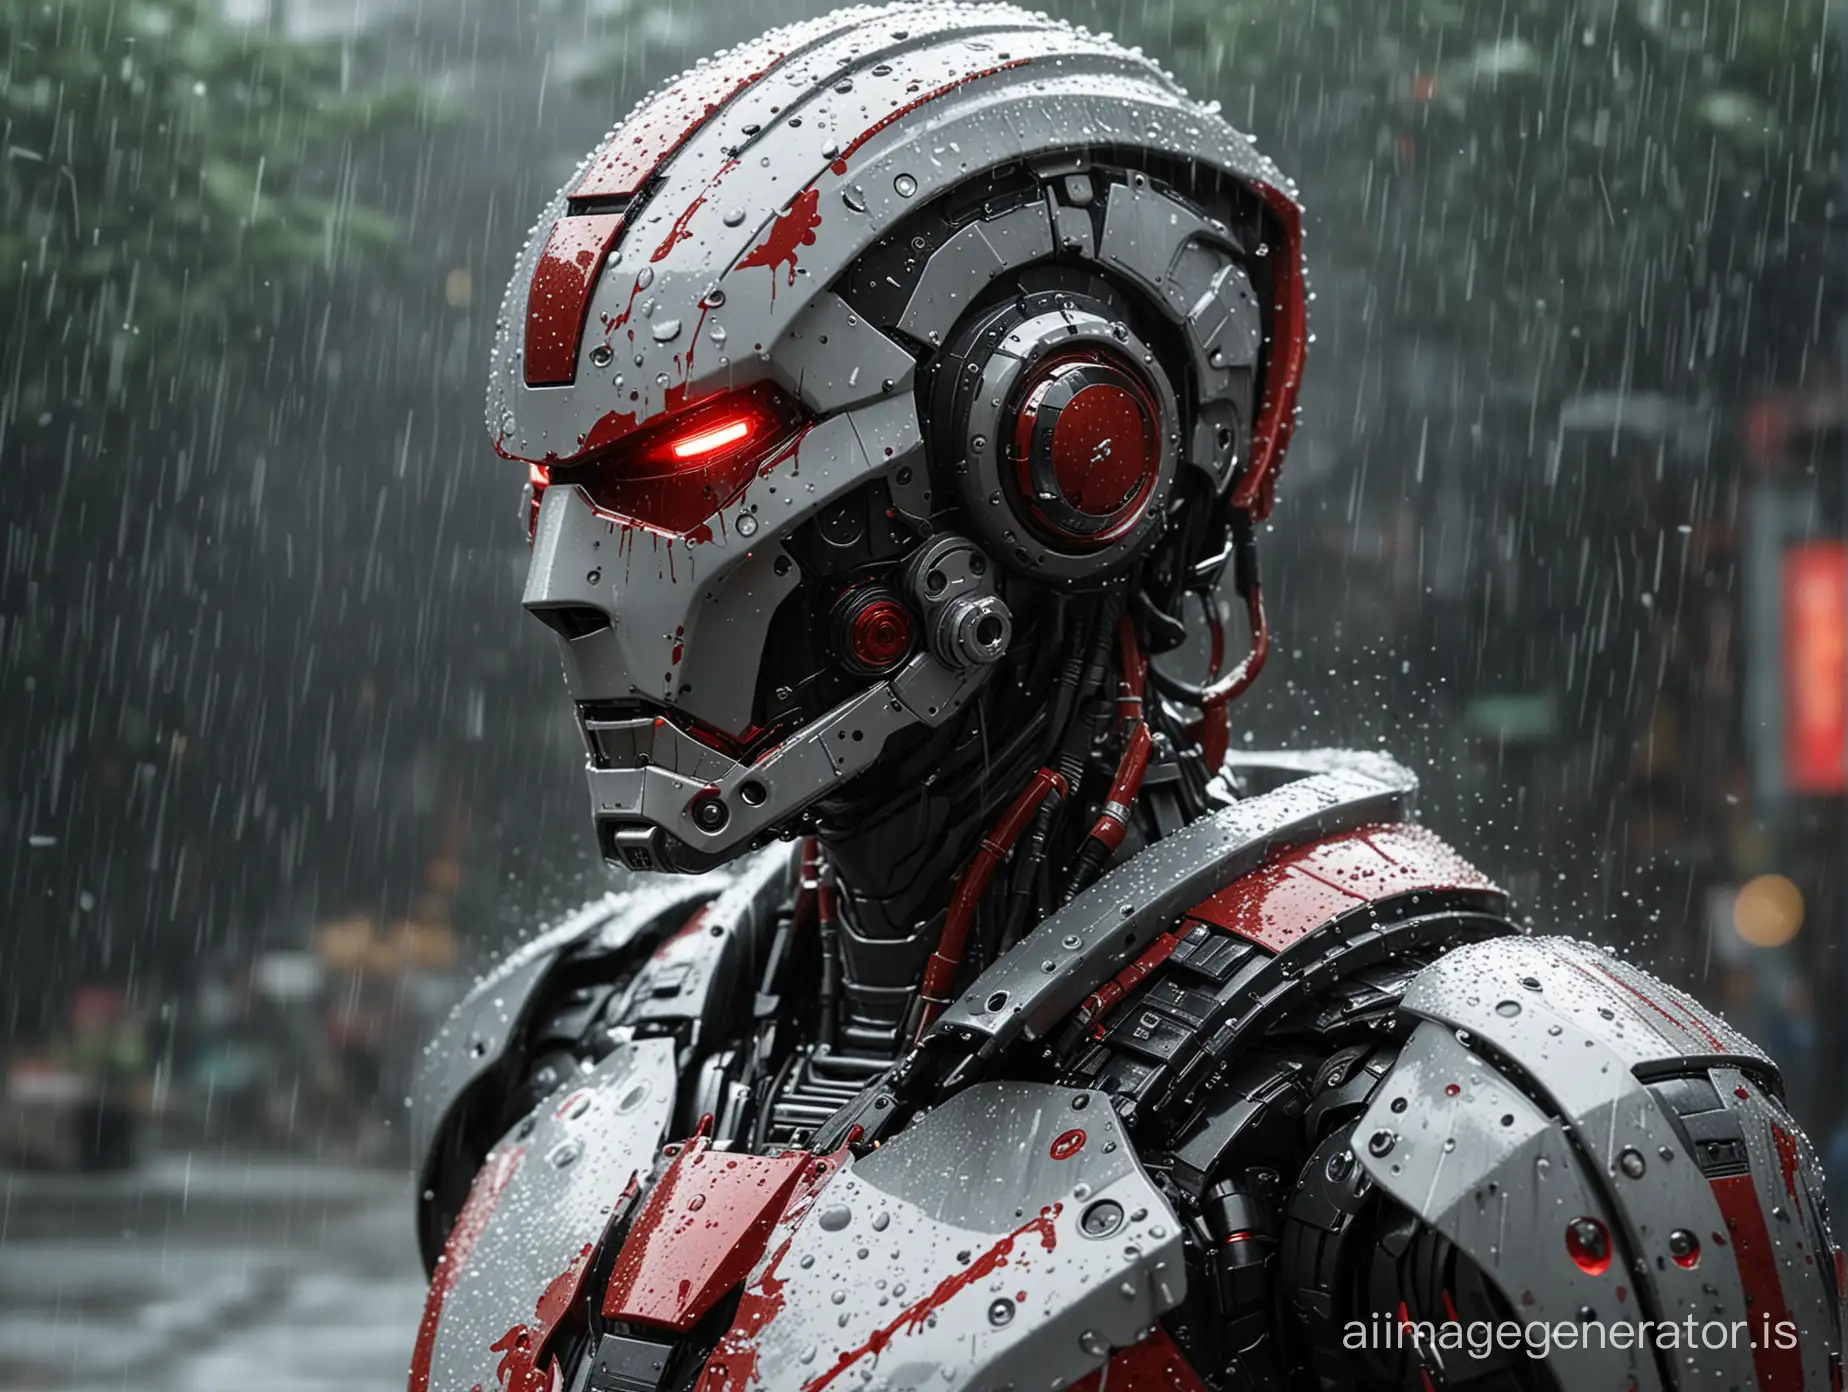  the photo shows a close-up of a humanoid robot or person in an advanced suit of armor. The design is sleek and modern, with red and white accents on a mostly black and gray base. It appears to be raining, as water droplets can be seen on the surface of the armor, the subject is either a robot or a person in a futuristic suit of armor, characterized by its sleek shape and intricate details, the helmet has red, viewfinder-like eyes, giving it an intense and focused look, water droplets can be seen on the surface, indicating that it is raining, in the background, blurred lights suggest an urban environment at night, the armor is highly detailed, with lines and patterns that suggest advanced technology, --v 6 --ar 9:16 